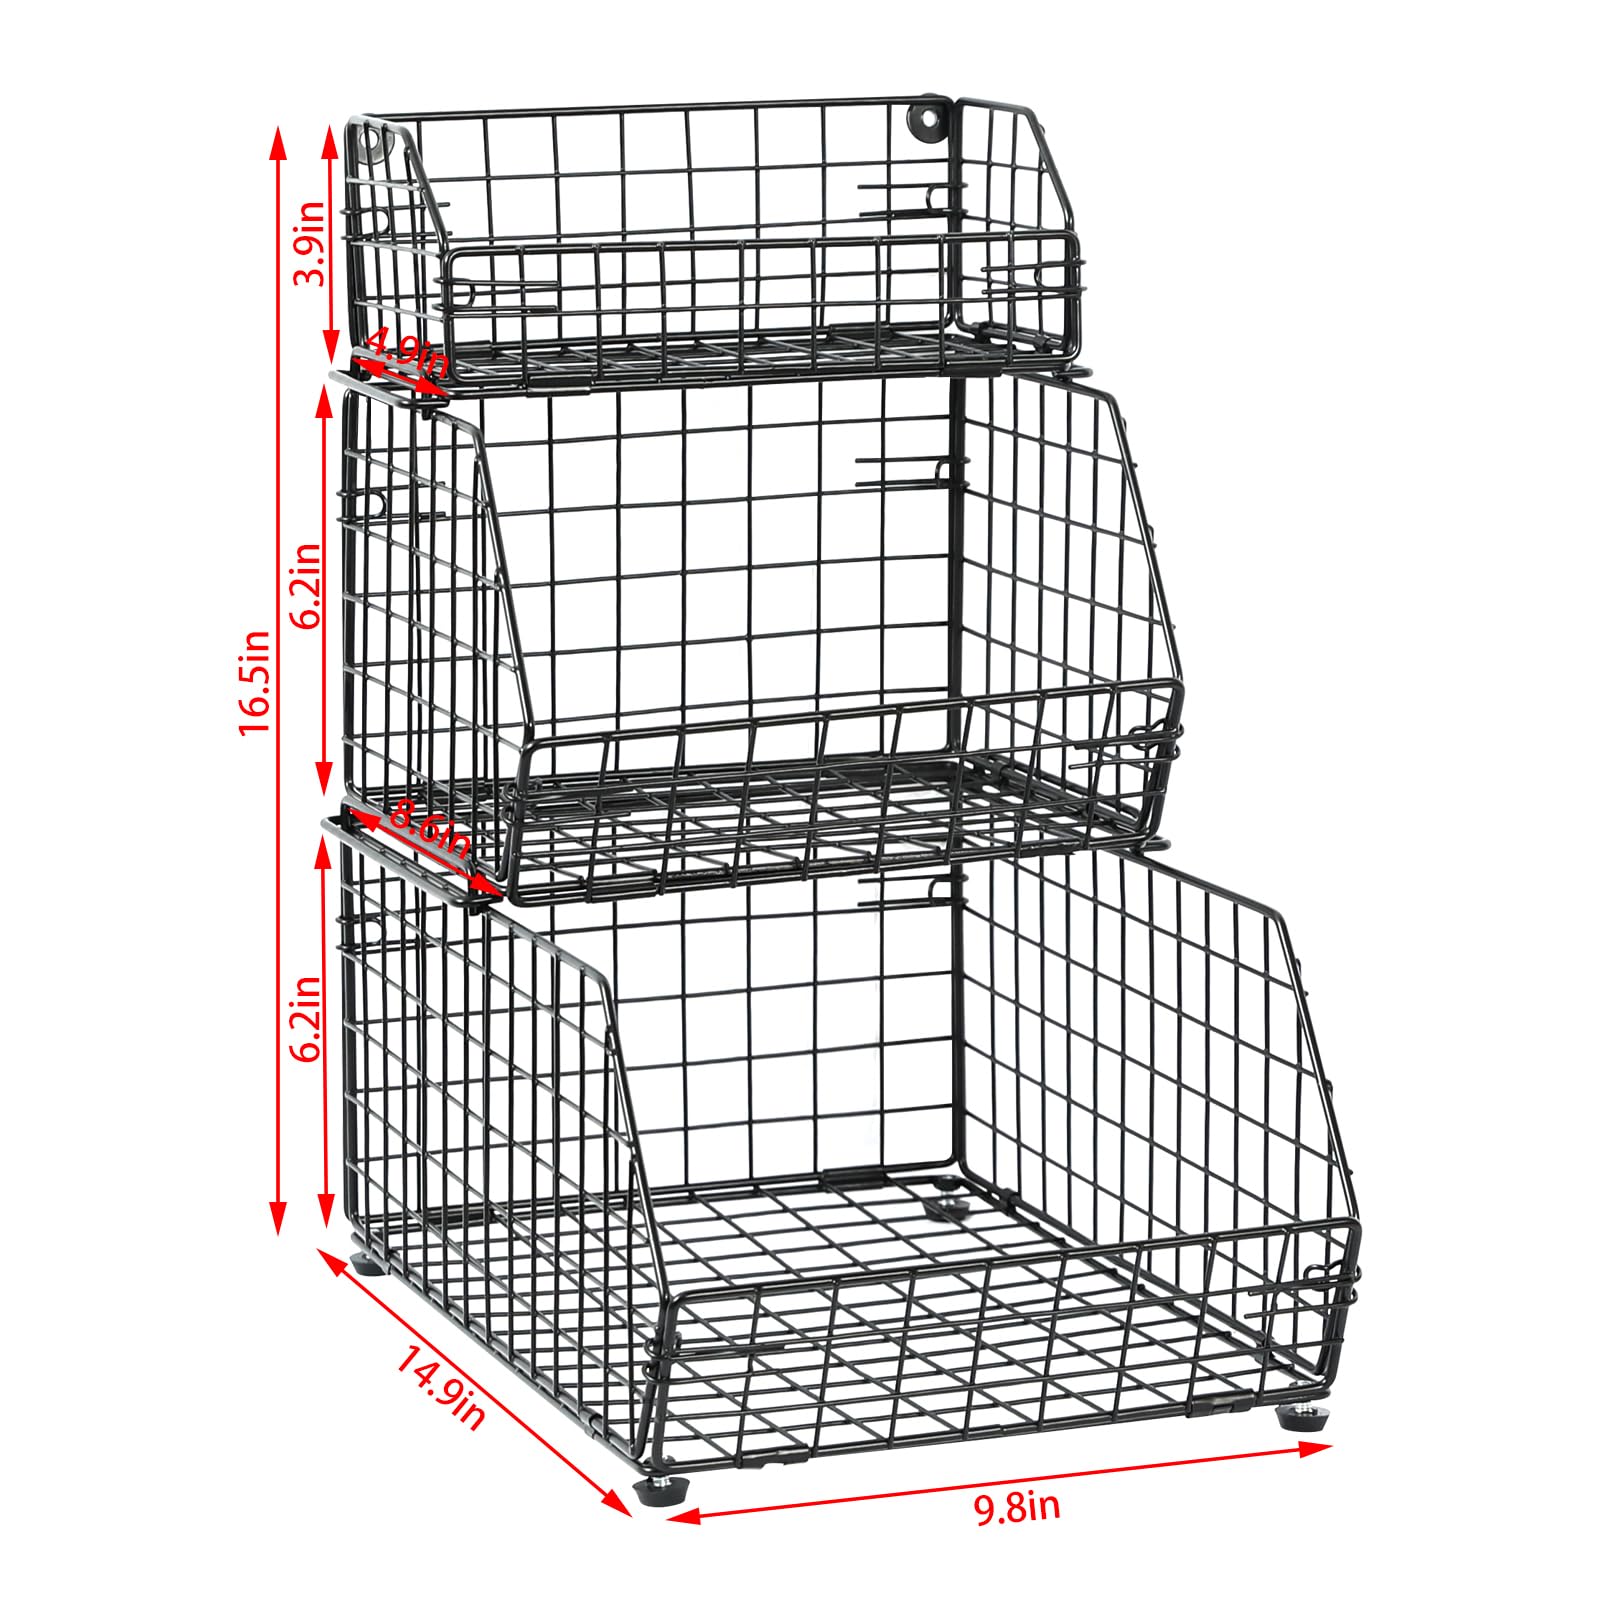 Yuzehuaza 3 Tier Fruit and Vegetable Basket Wall-Mounted & Countertop Organizer for Potato Onion Stackable Wire Baskets for Pantry Kitchen Cabinet for Produce Snack Canned Food Storage, Black